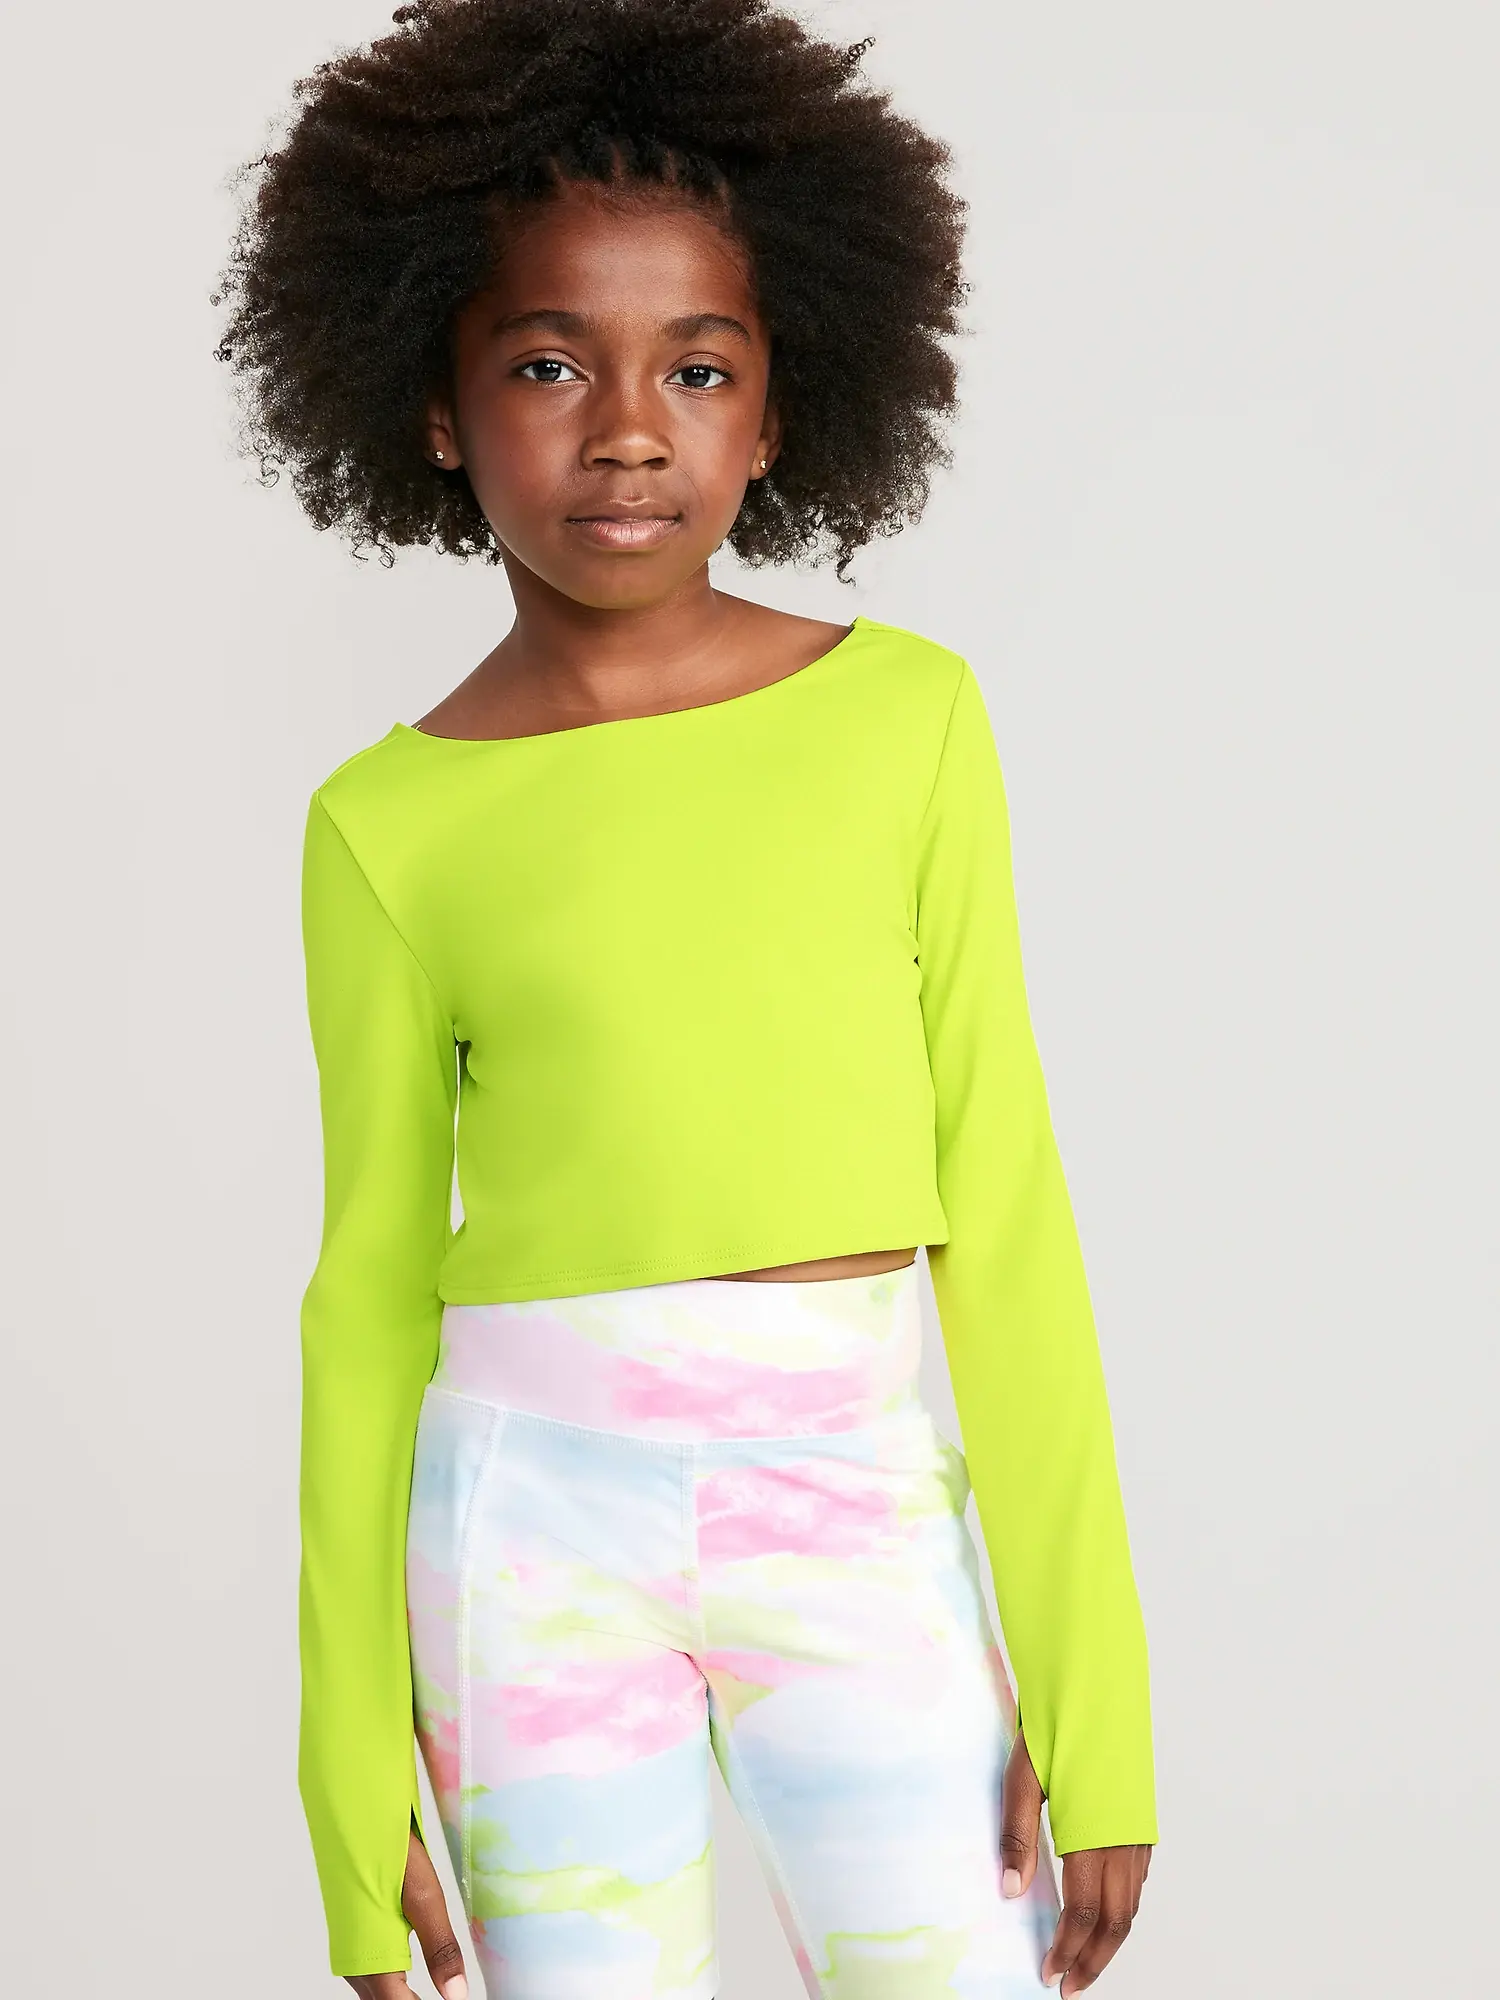 Old Navy - PowerSoft Cropped Twist-Back Performance Top for Girls green